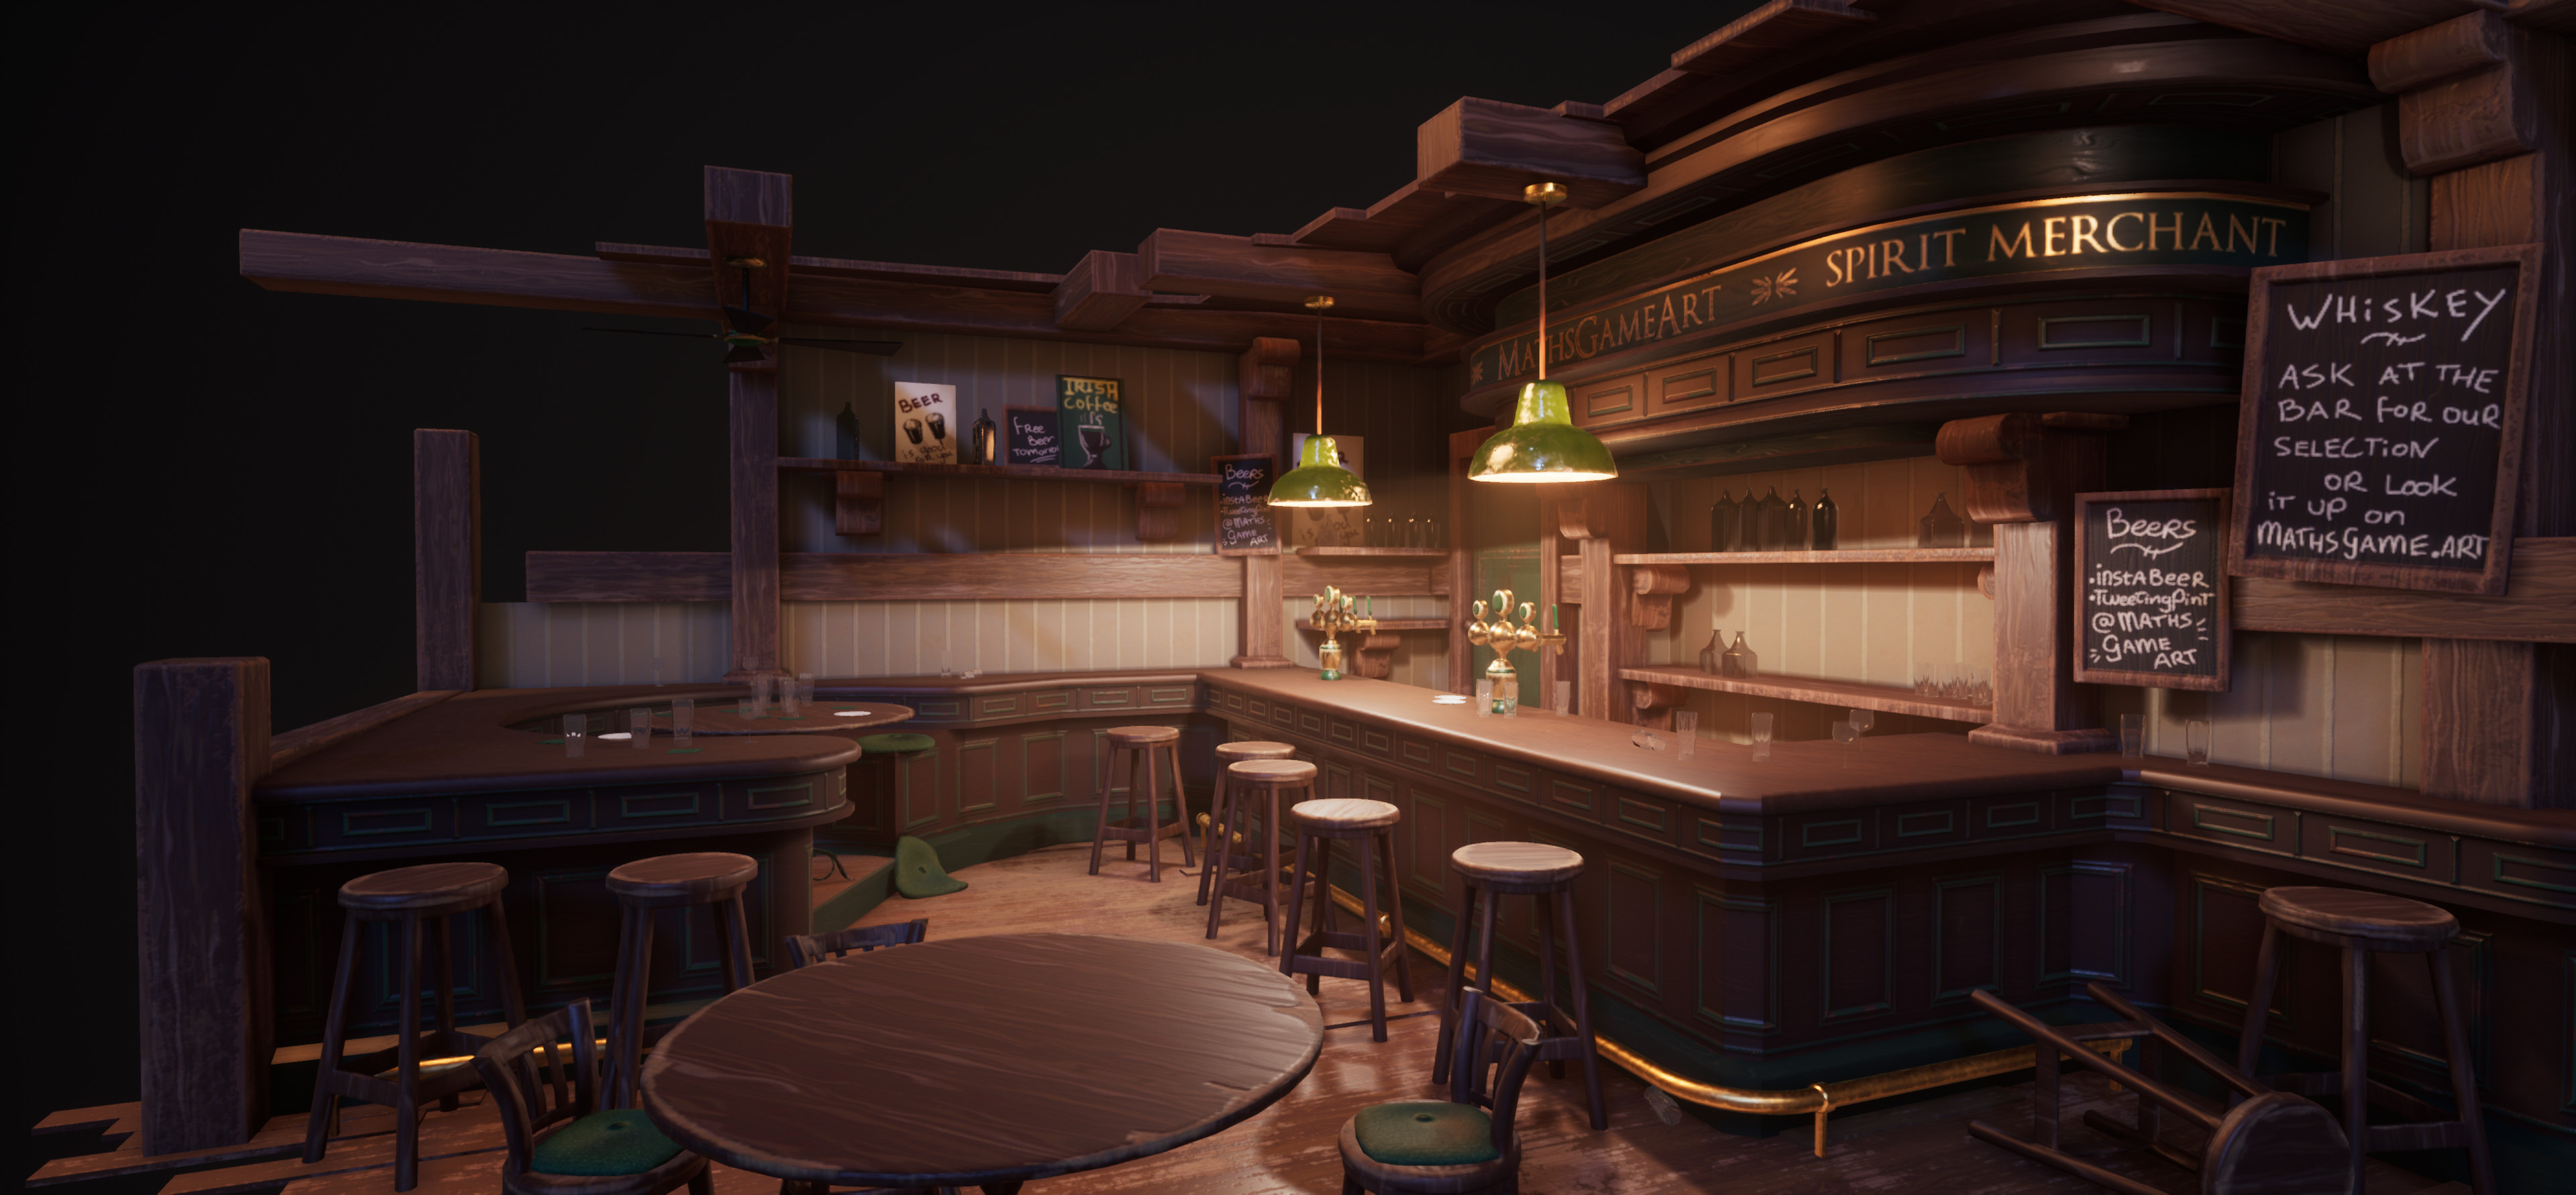 Imported everyhing into UE4 to really  get the most out of the lighting. I looked at reference images of cafés and pubs at night and exaggerated some features to boost the atmosphere. 